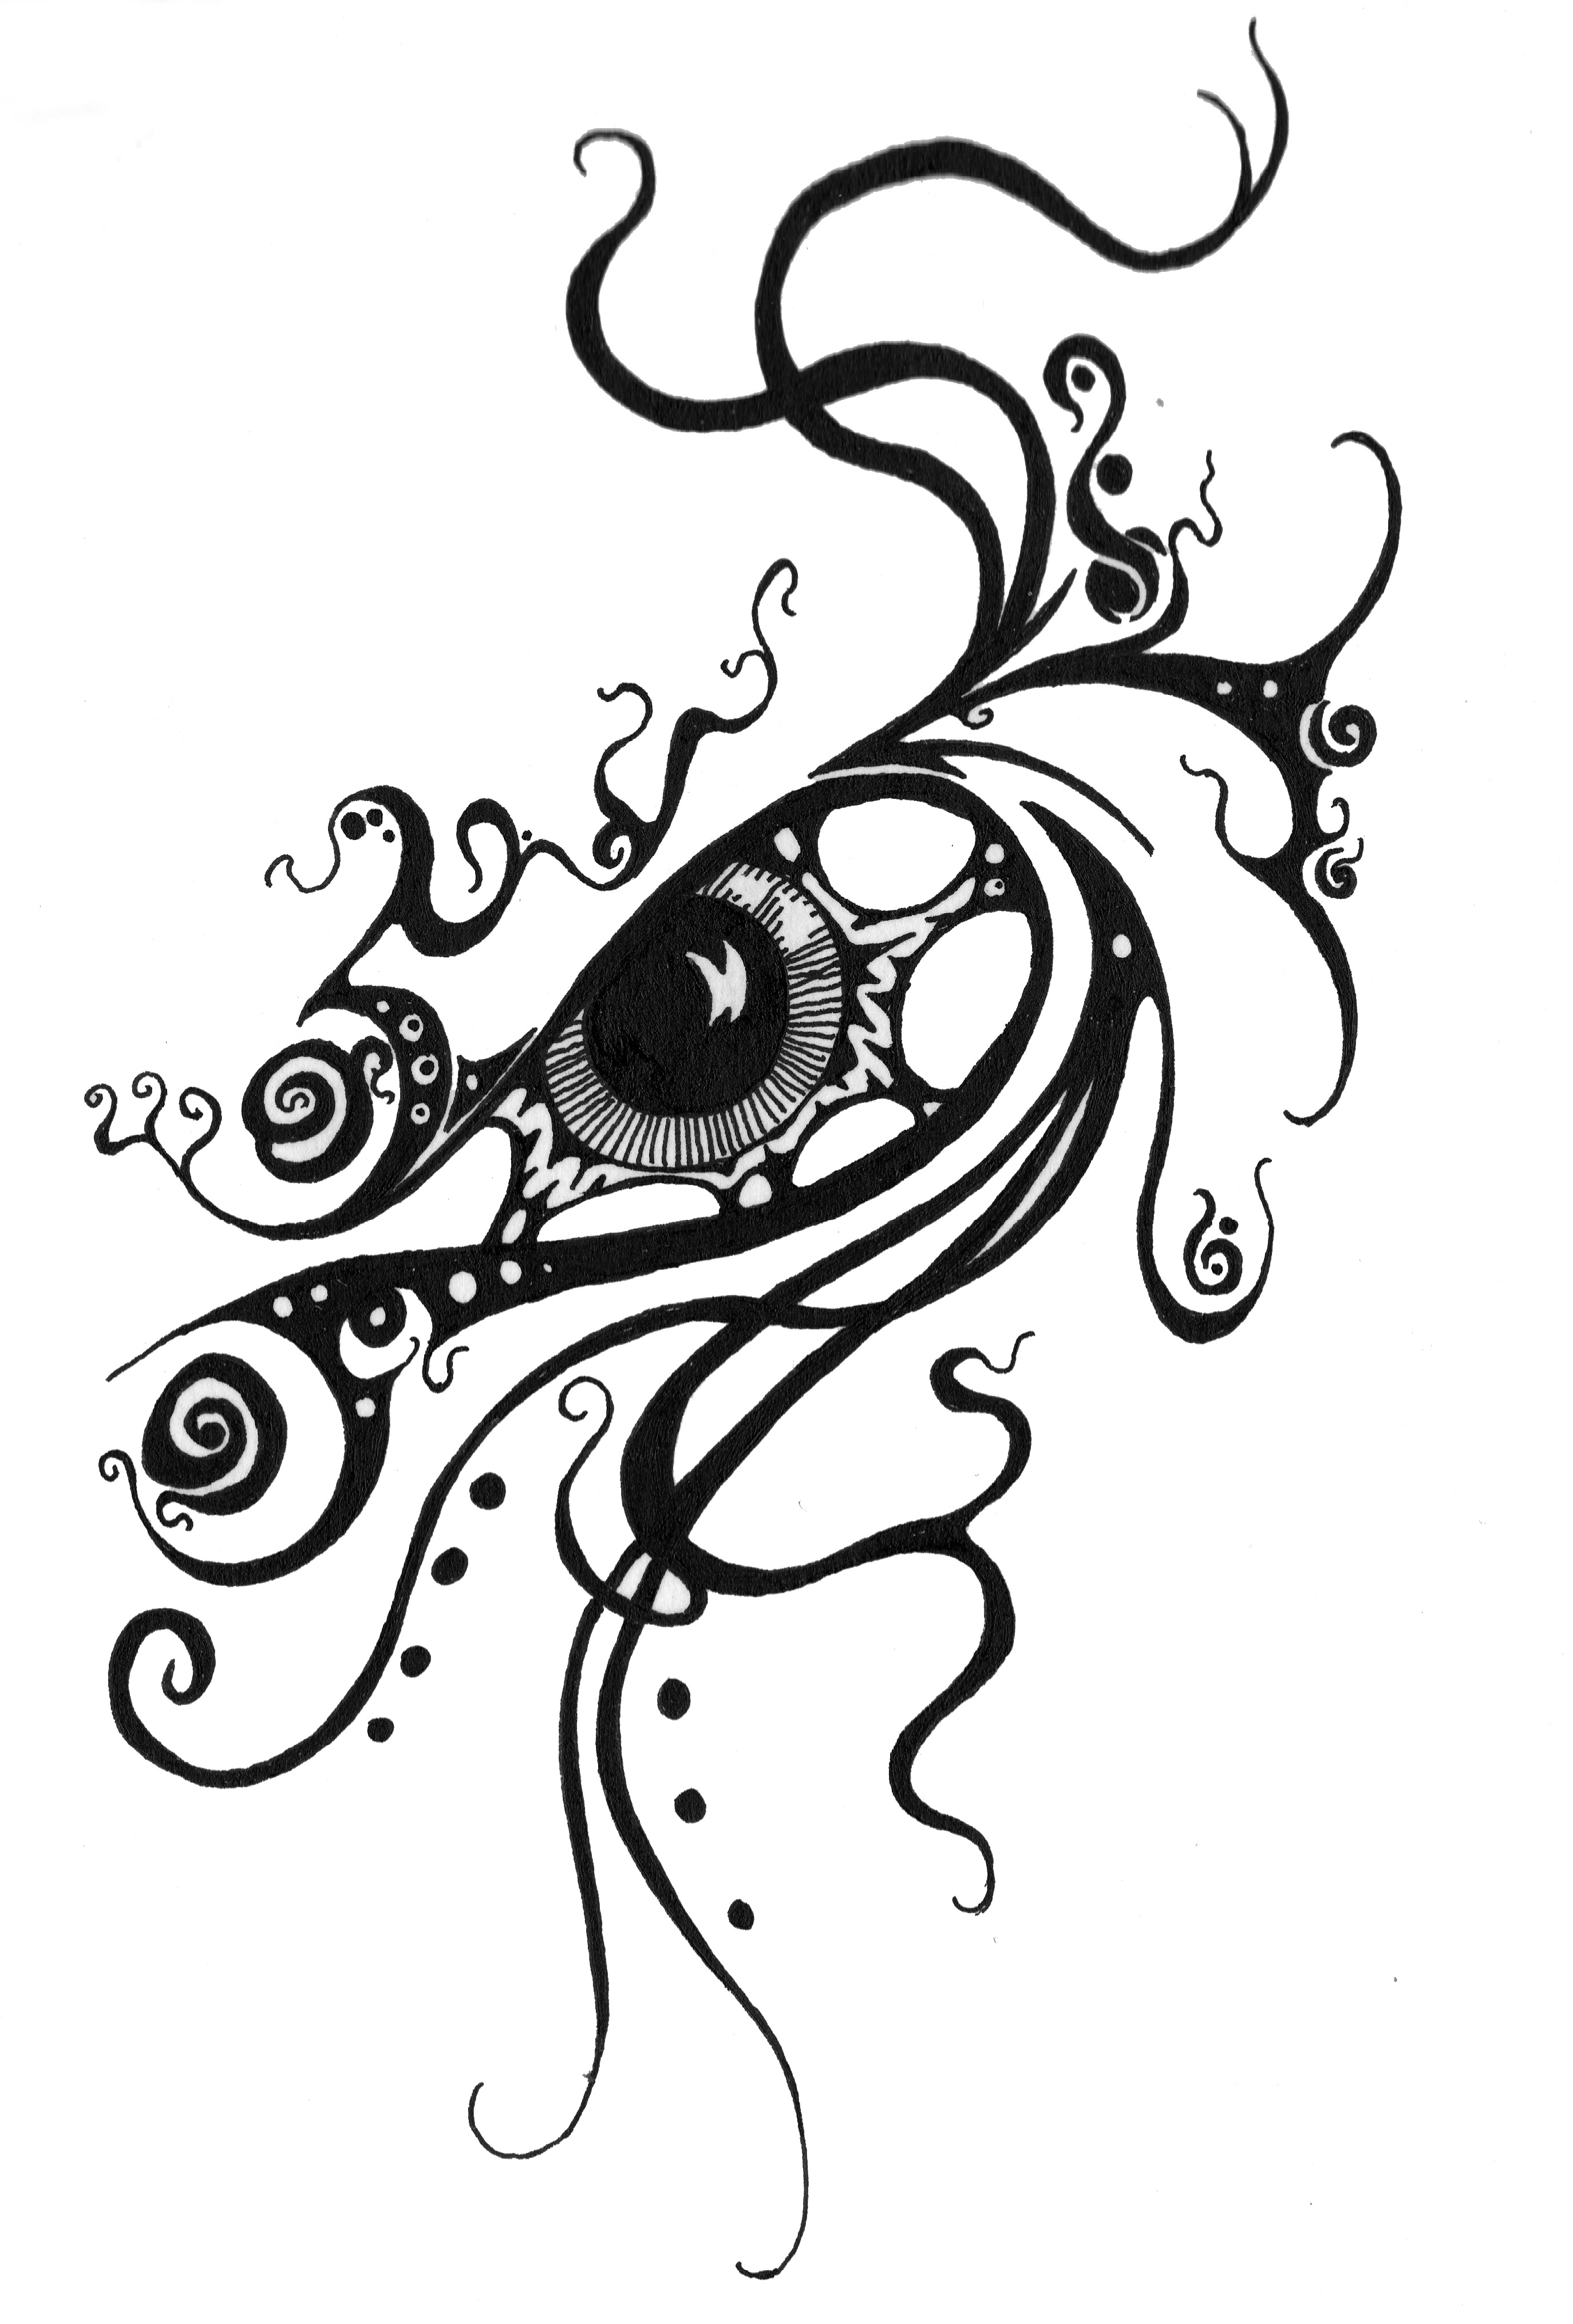 Eye Tattoos Designs, Ideas and Meaning | Tattoos For You